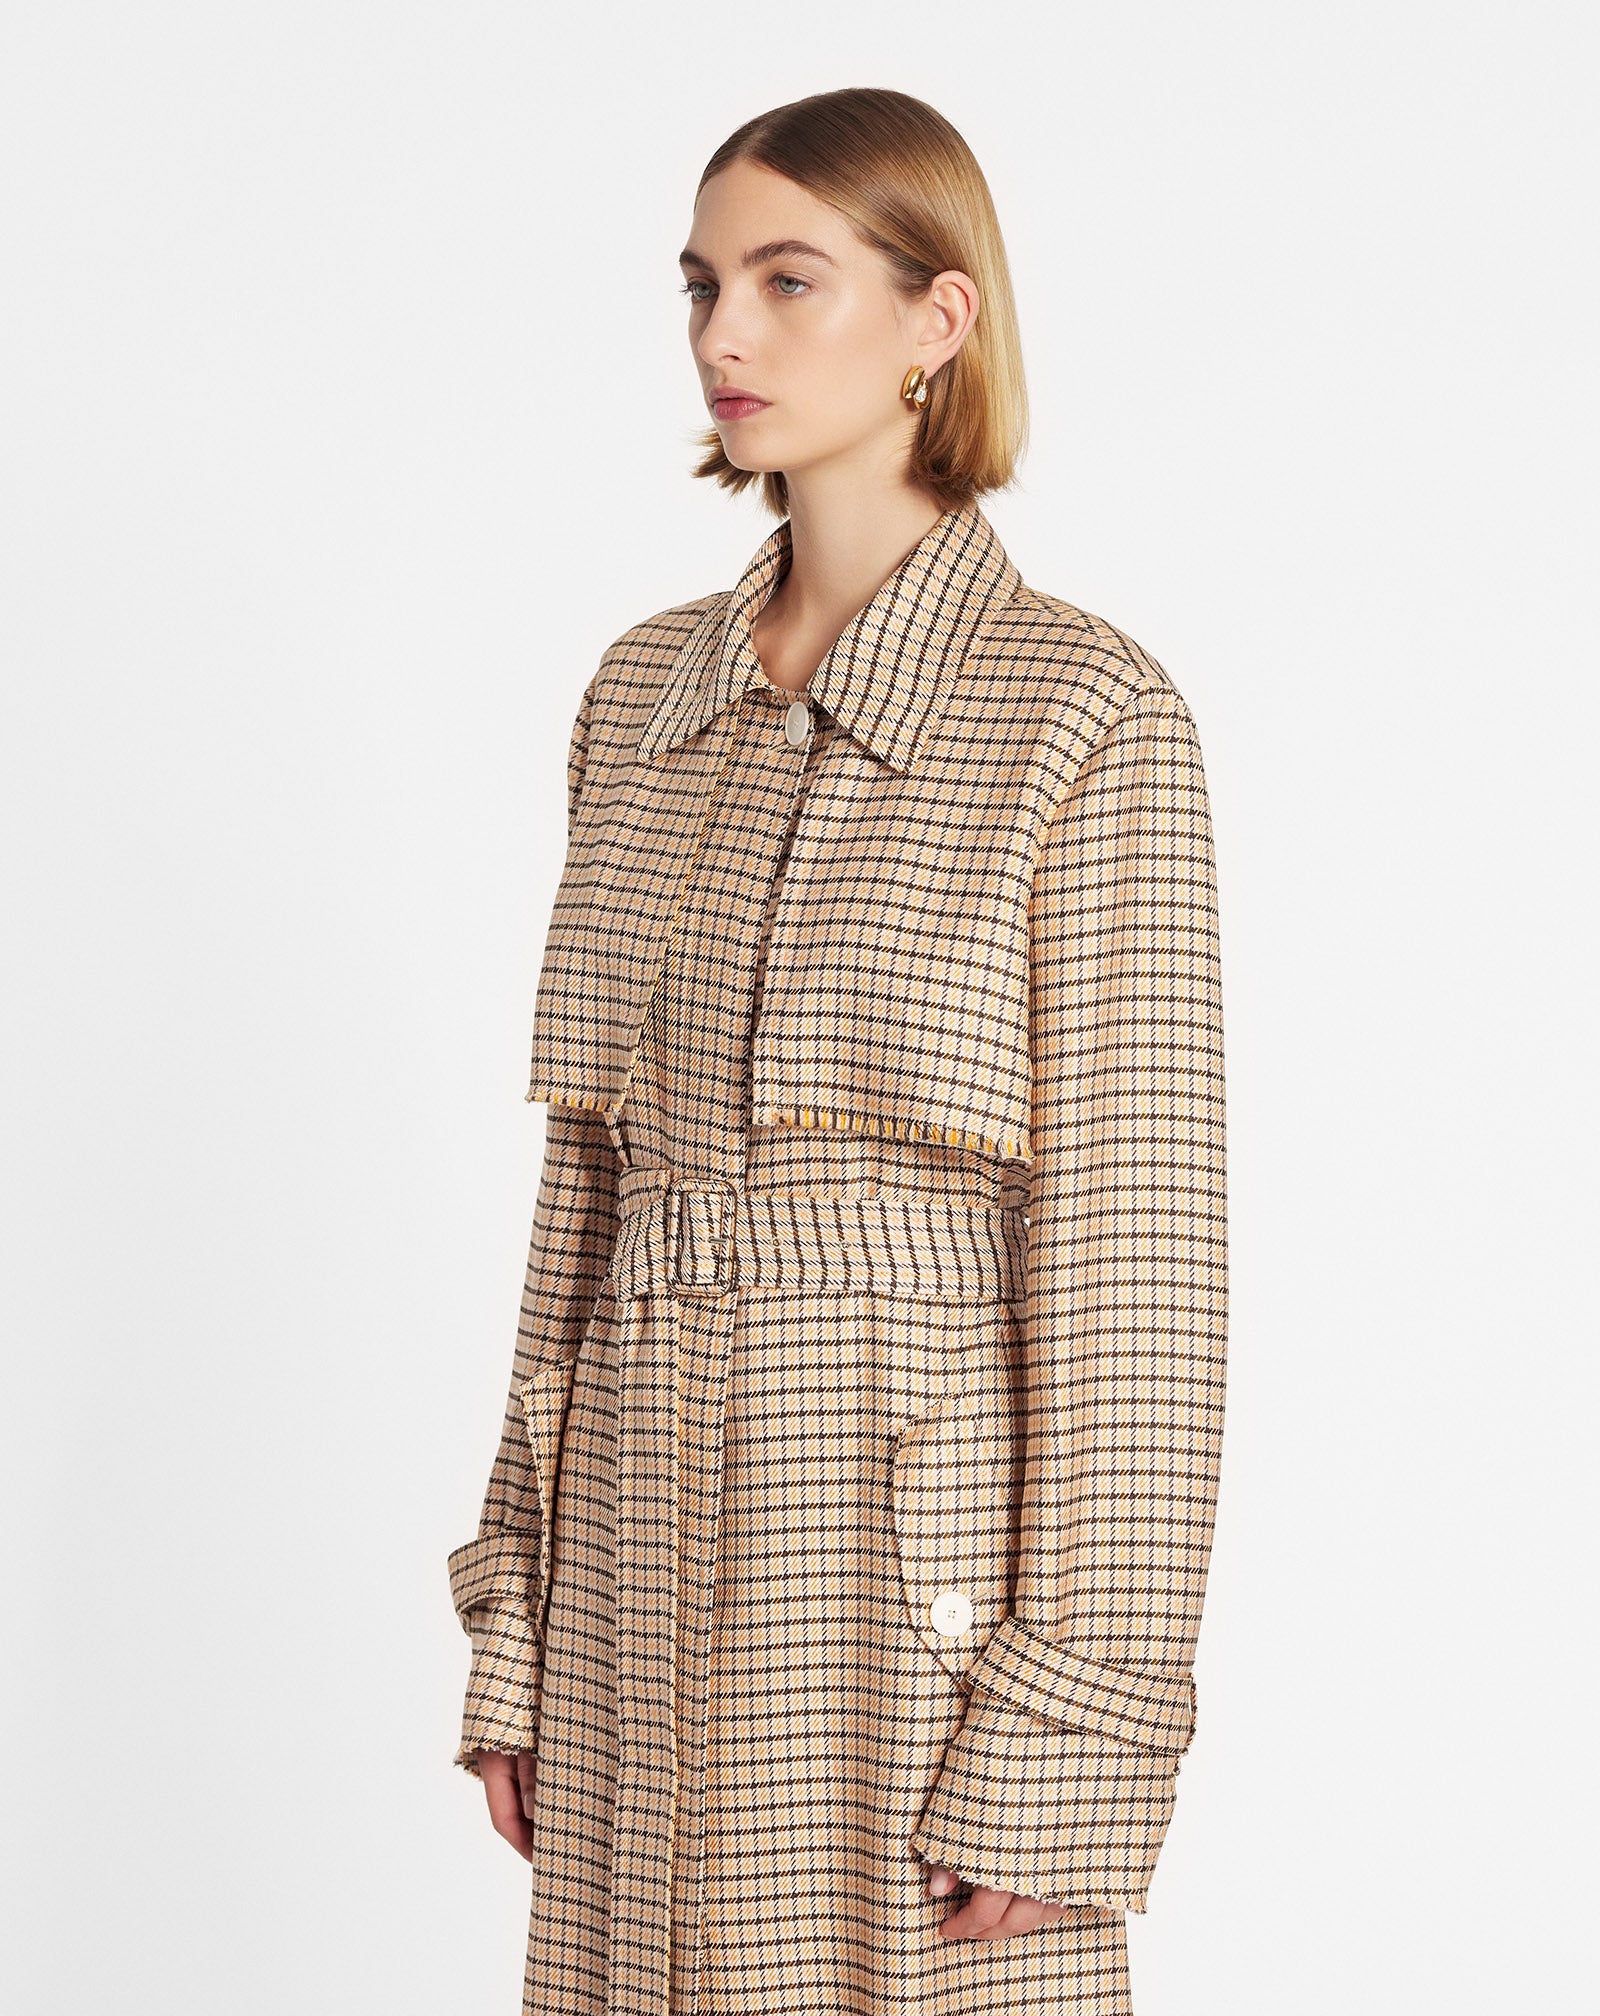 PRINTED FLOWING TRENCH COAT